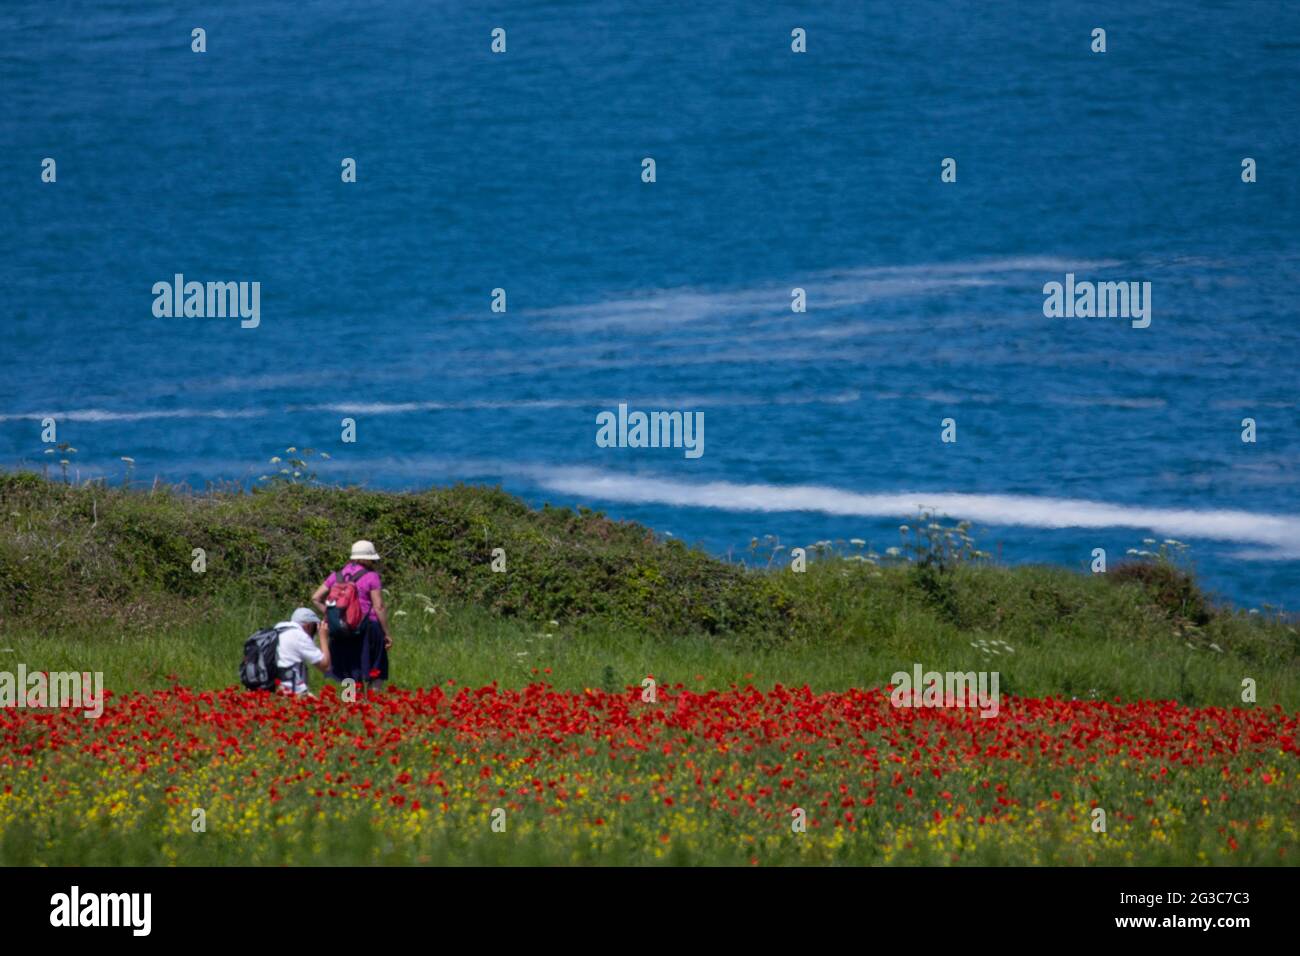 West Pentire, Cornwall, UK. Tuesday 15th June 2021, UK Weather: Hot weather over flowering wild flowers fields at West Pentire, Cornwall as this couple discovered viewing the spectacle  © DGDImages/Alamy Live News Stock Photo